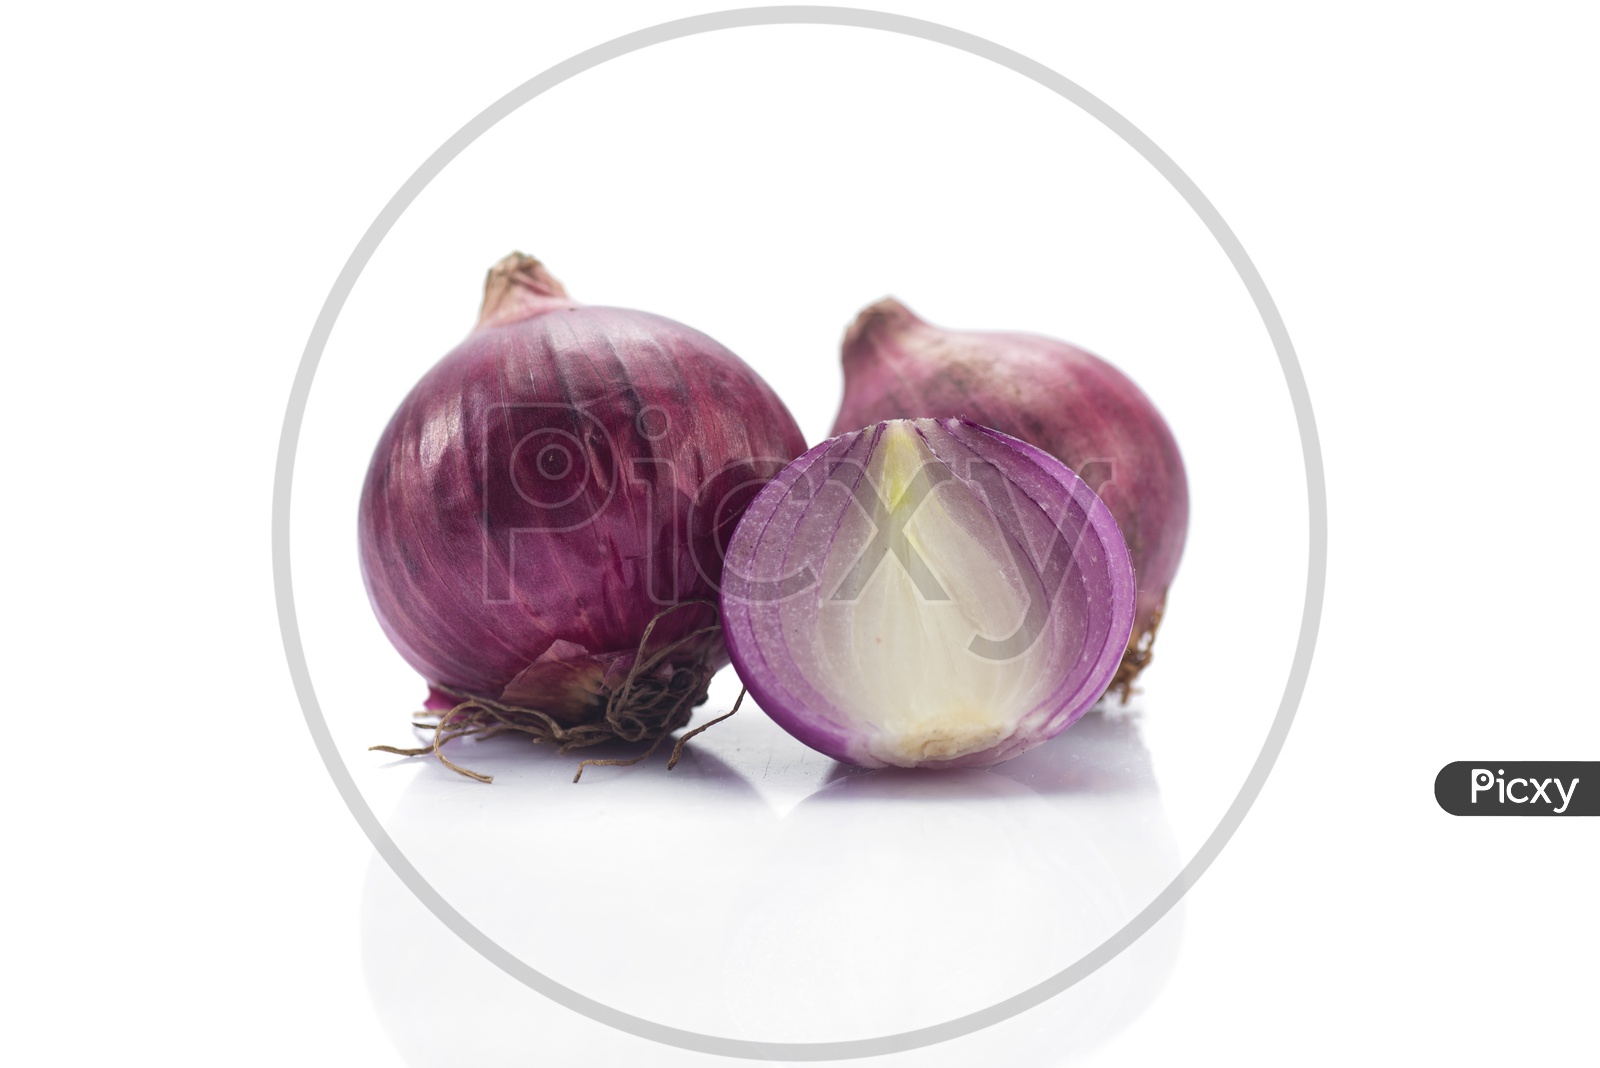 Red Onions Chopped on an Isolated White Background